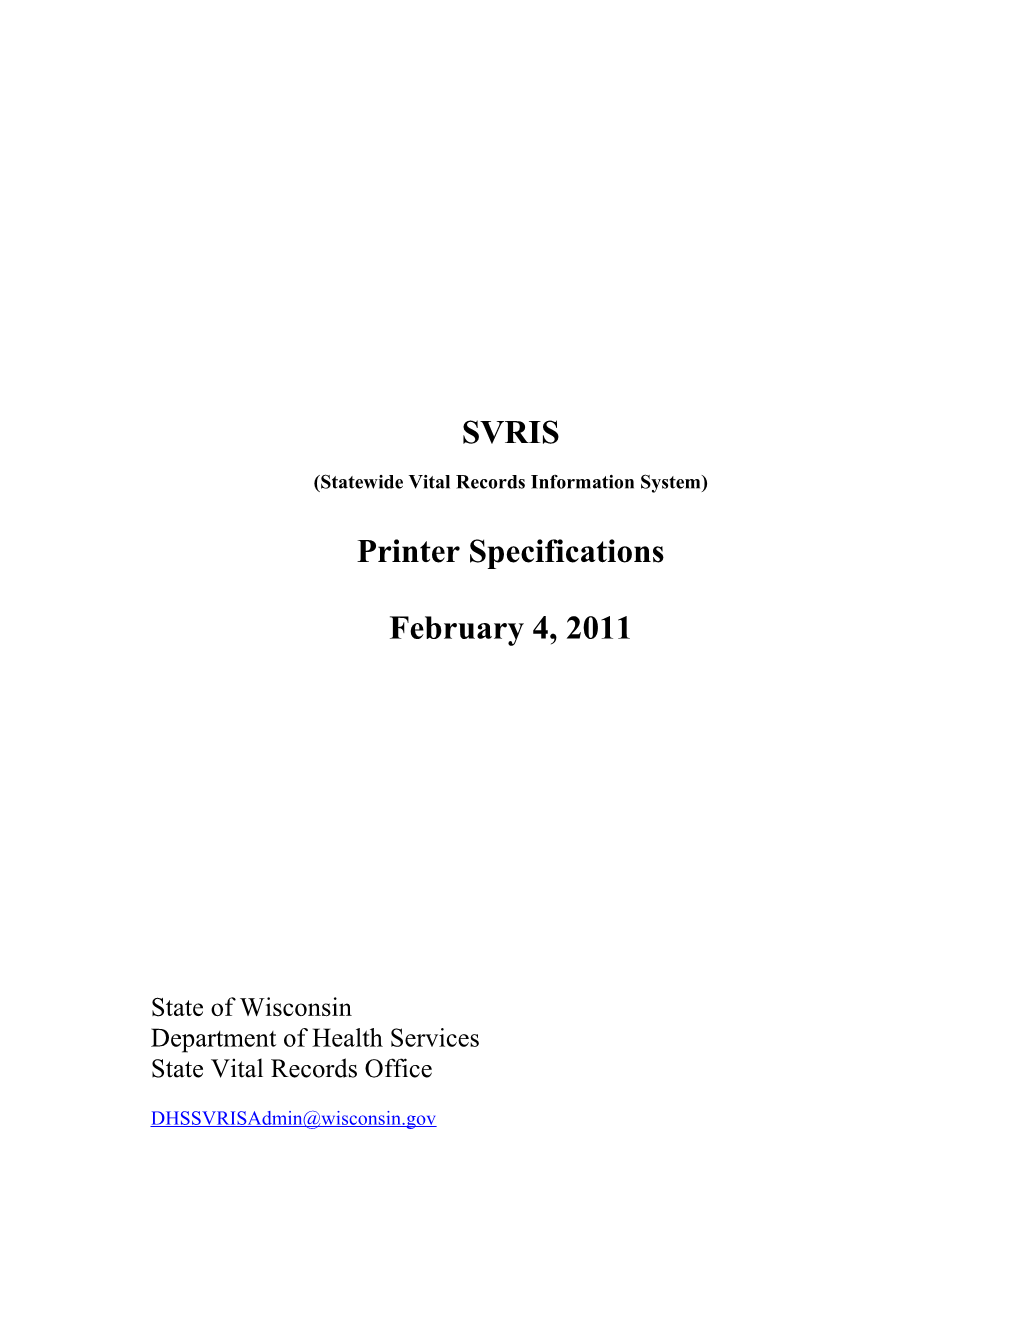 Wisconsin SVRO - Printer Check and Specifications for Lvros